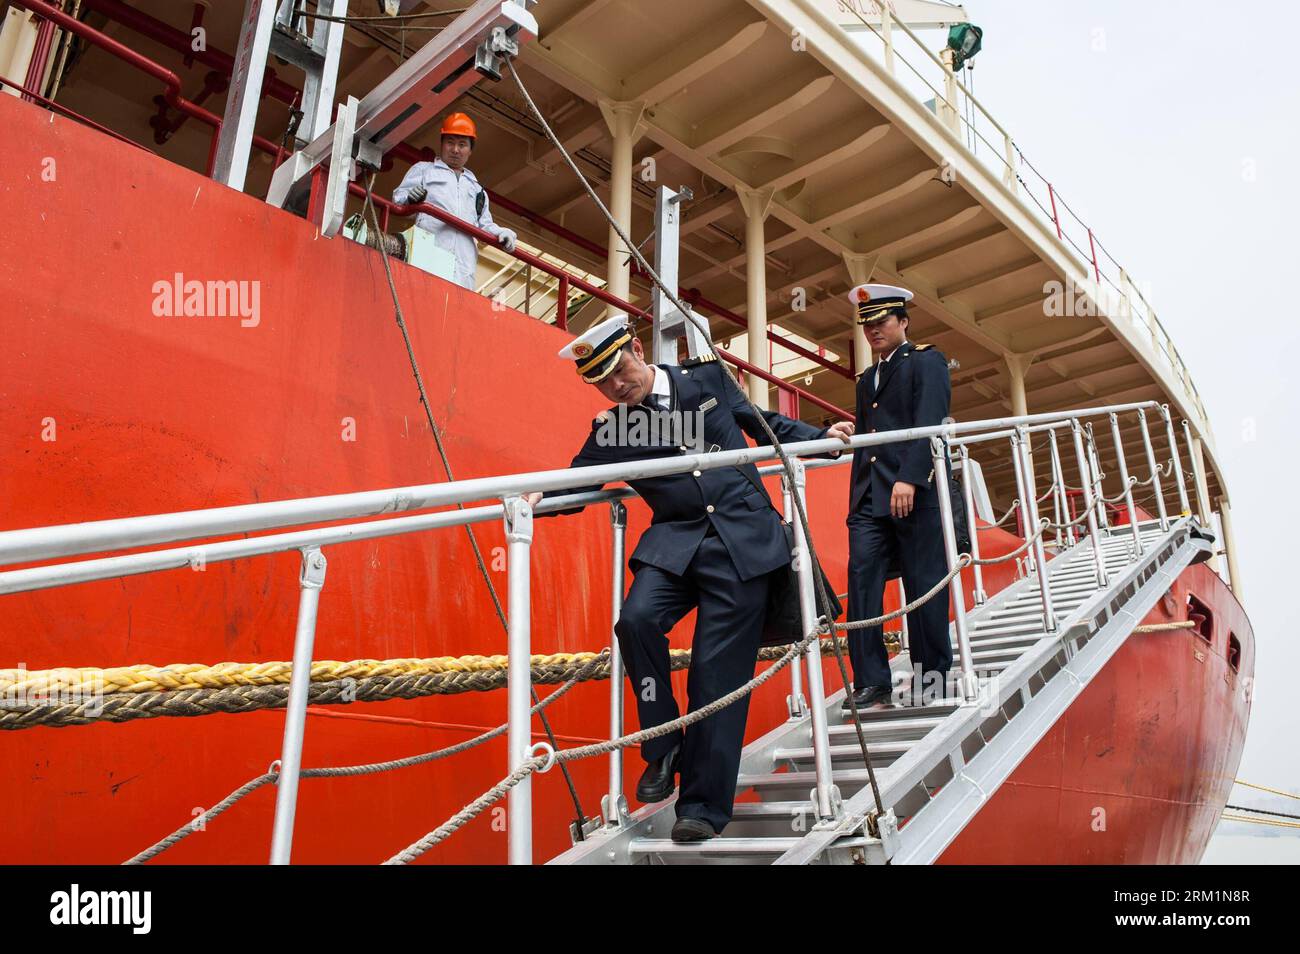 Bildnummer: 59604348  Datum: 24.04.2013  Copyright: imago/Xinhua NANJING, 2013 -- Wang Lianmiao (L) and Zhu Hui leave the Maple Star after the vessel is safely docked at the port of Zhangjiagang in east China s Jiangsu Province, April 24, 2013. Wang Lianmiao and Zhu Hui arrived at the port of Jingjiang on the morning of April 24, 2013. Both men are inland waterway pilots from the Yangtze River Pilot Centre. Awaiting them was the Maple Star, a 180-meter-long Marshall Islands-flagged cargo ship with a gross register tonnage of over 23,000. Under their pilotage, the Maple Star was to veer 180 deg Stock Photo